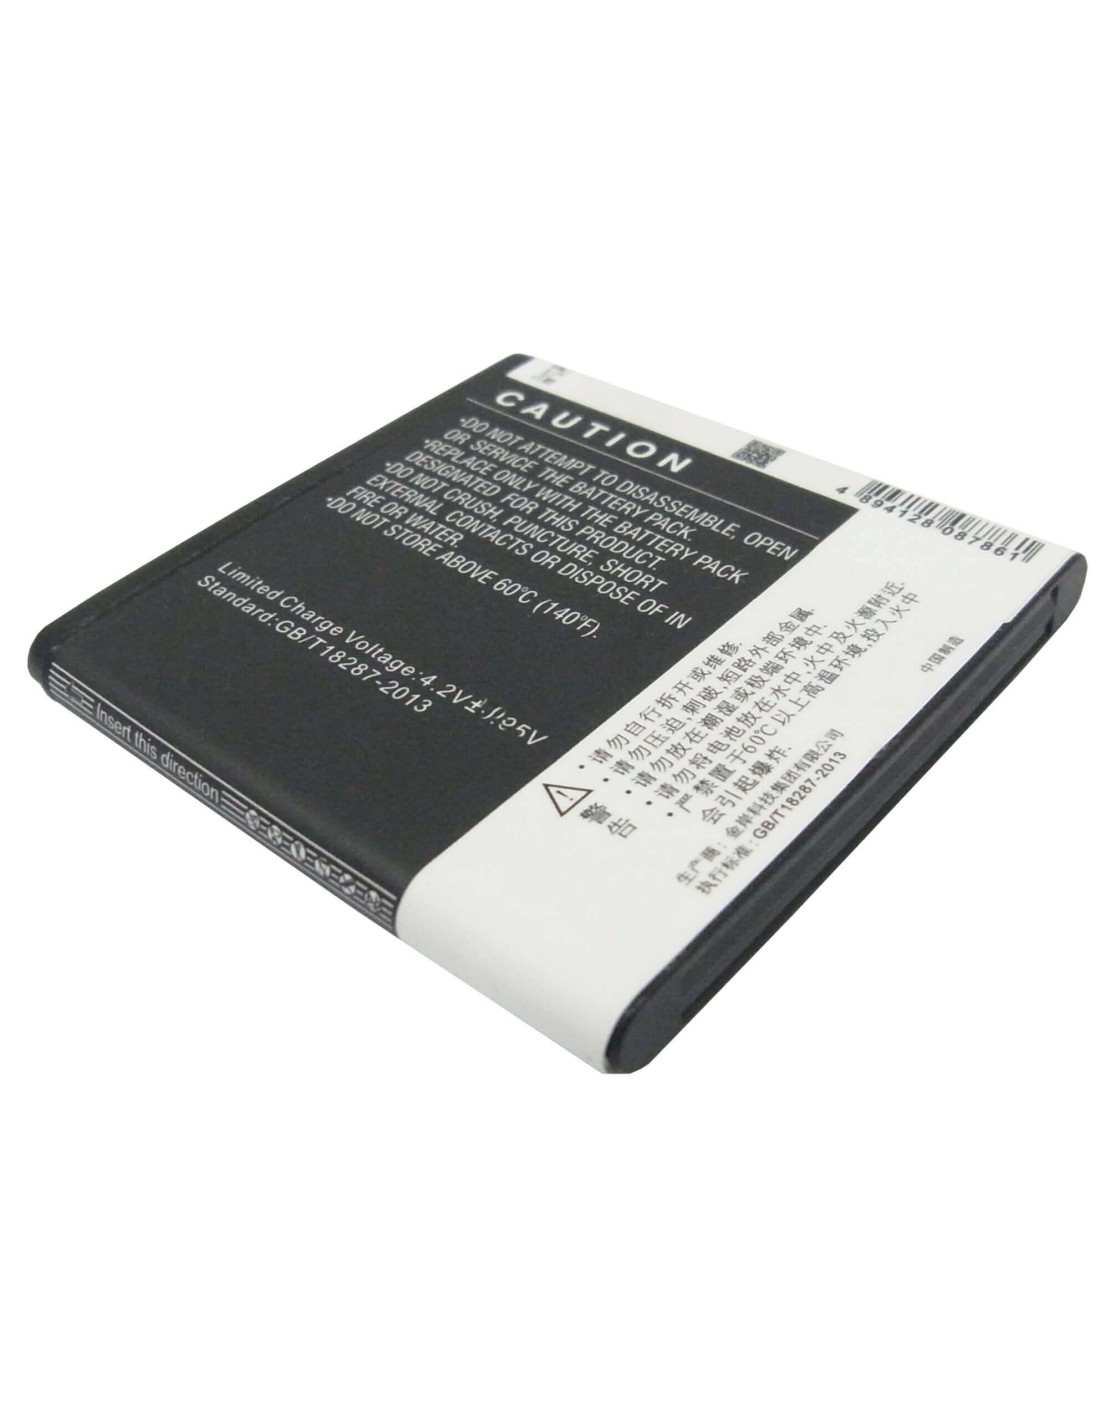 Battery for K-Touch W680, W608 3.7V, 1700mAh - 6.29Wh